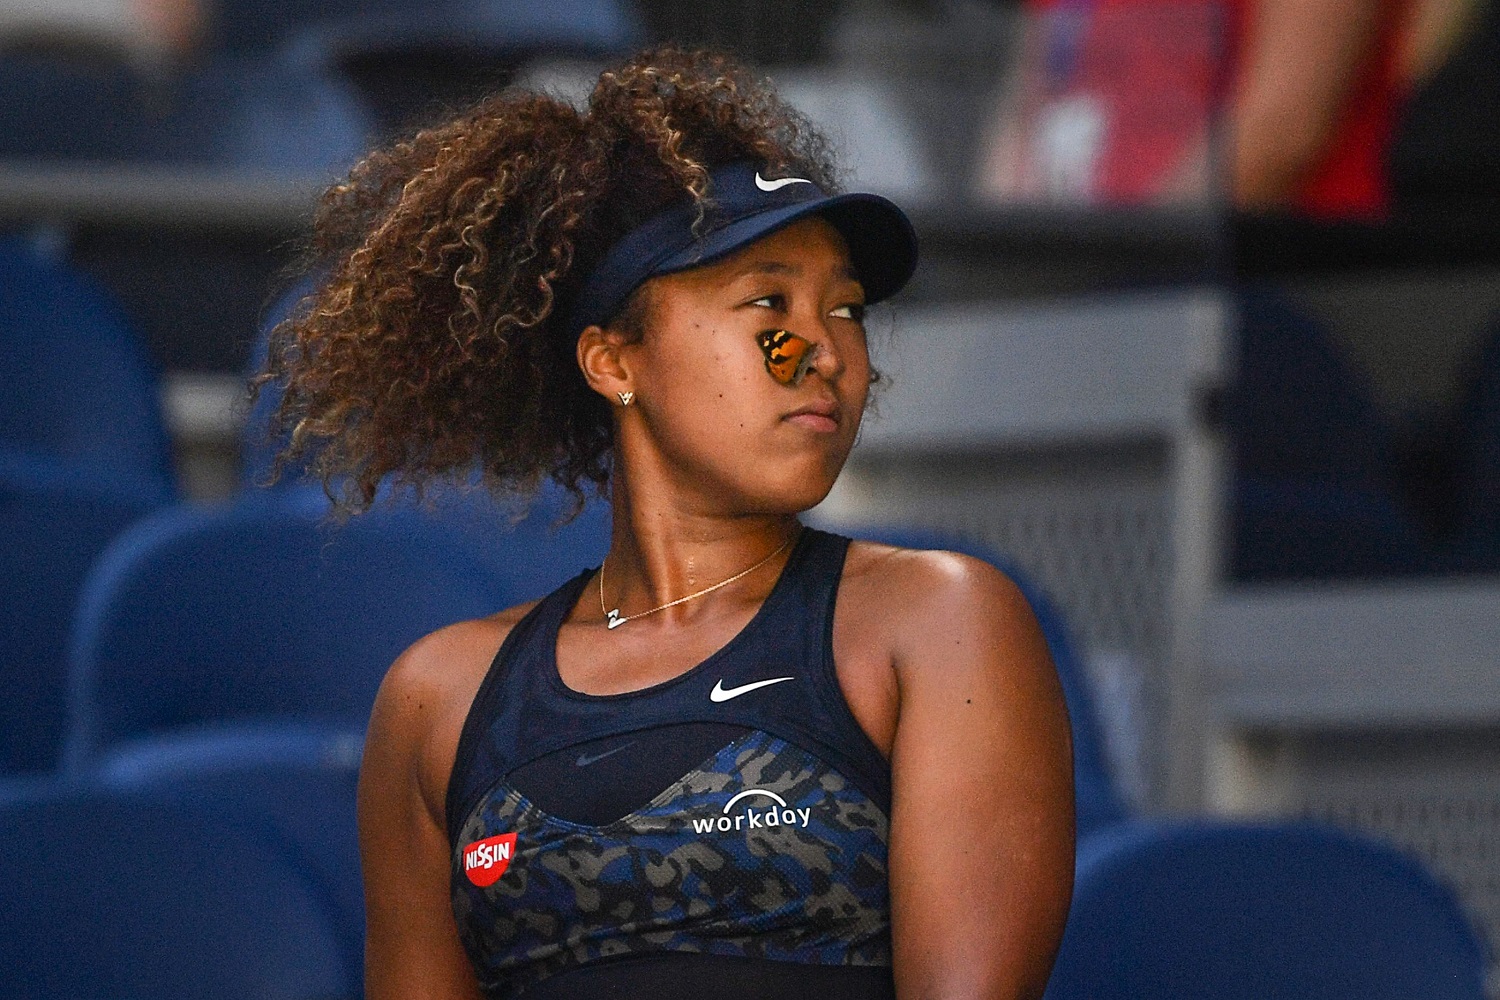 Naomi Osaka advanced to the fourth round of the Australian Open despite an interruption by a butterfly